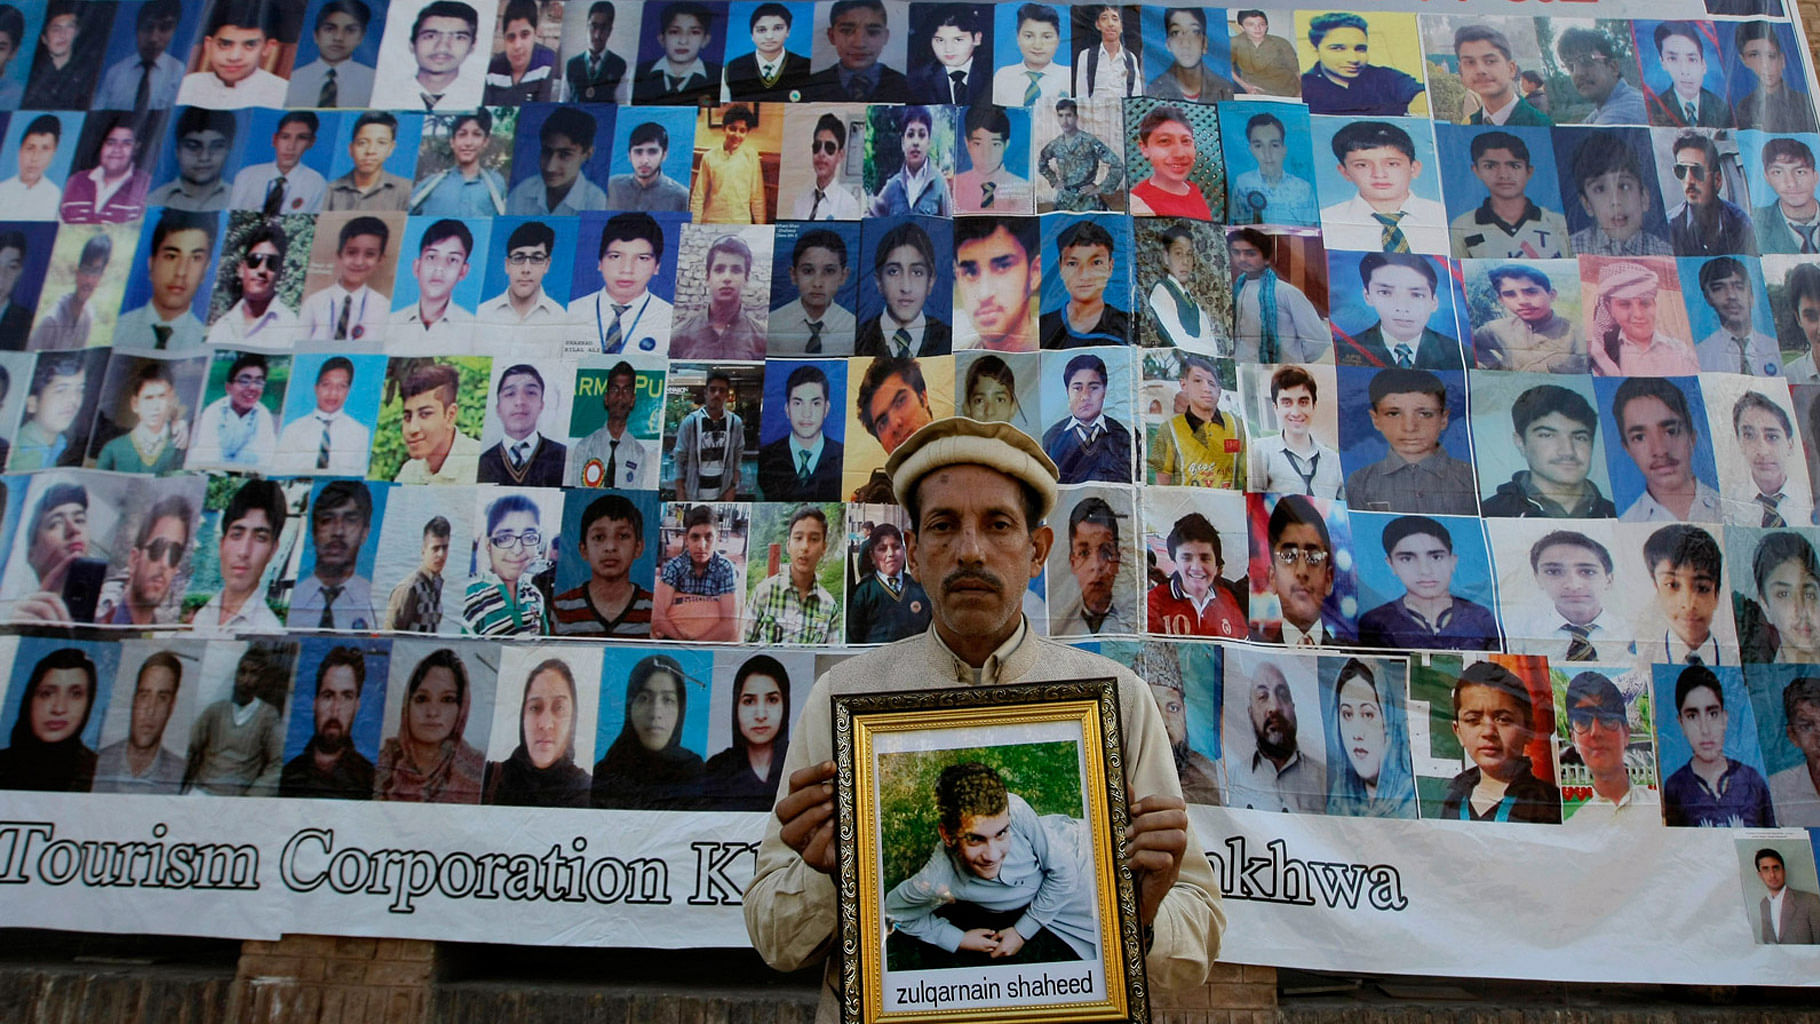 A Pakistani father holds a picture of his son who was killed in an attack, in front of photographs of other victims, ahead of the first anniversary of the Peshawar school attack on 16 December 2014. (Photo: AP)